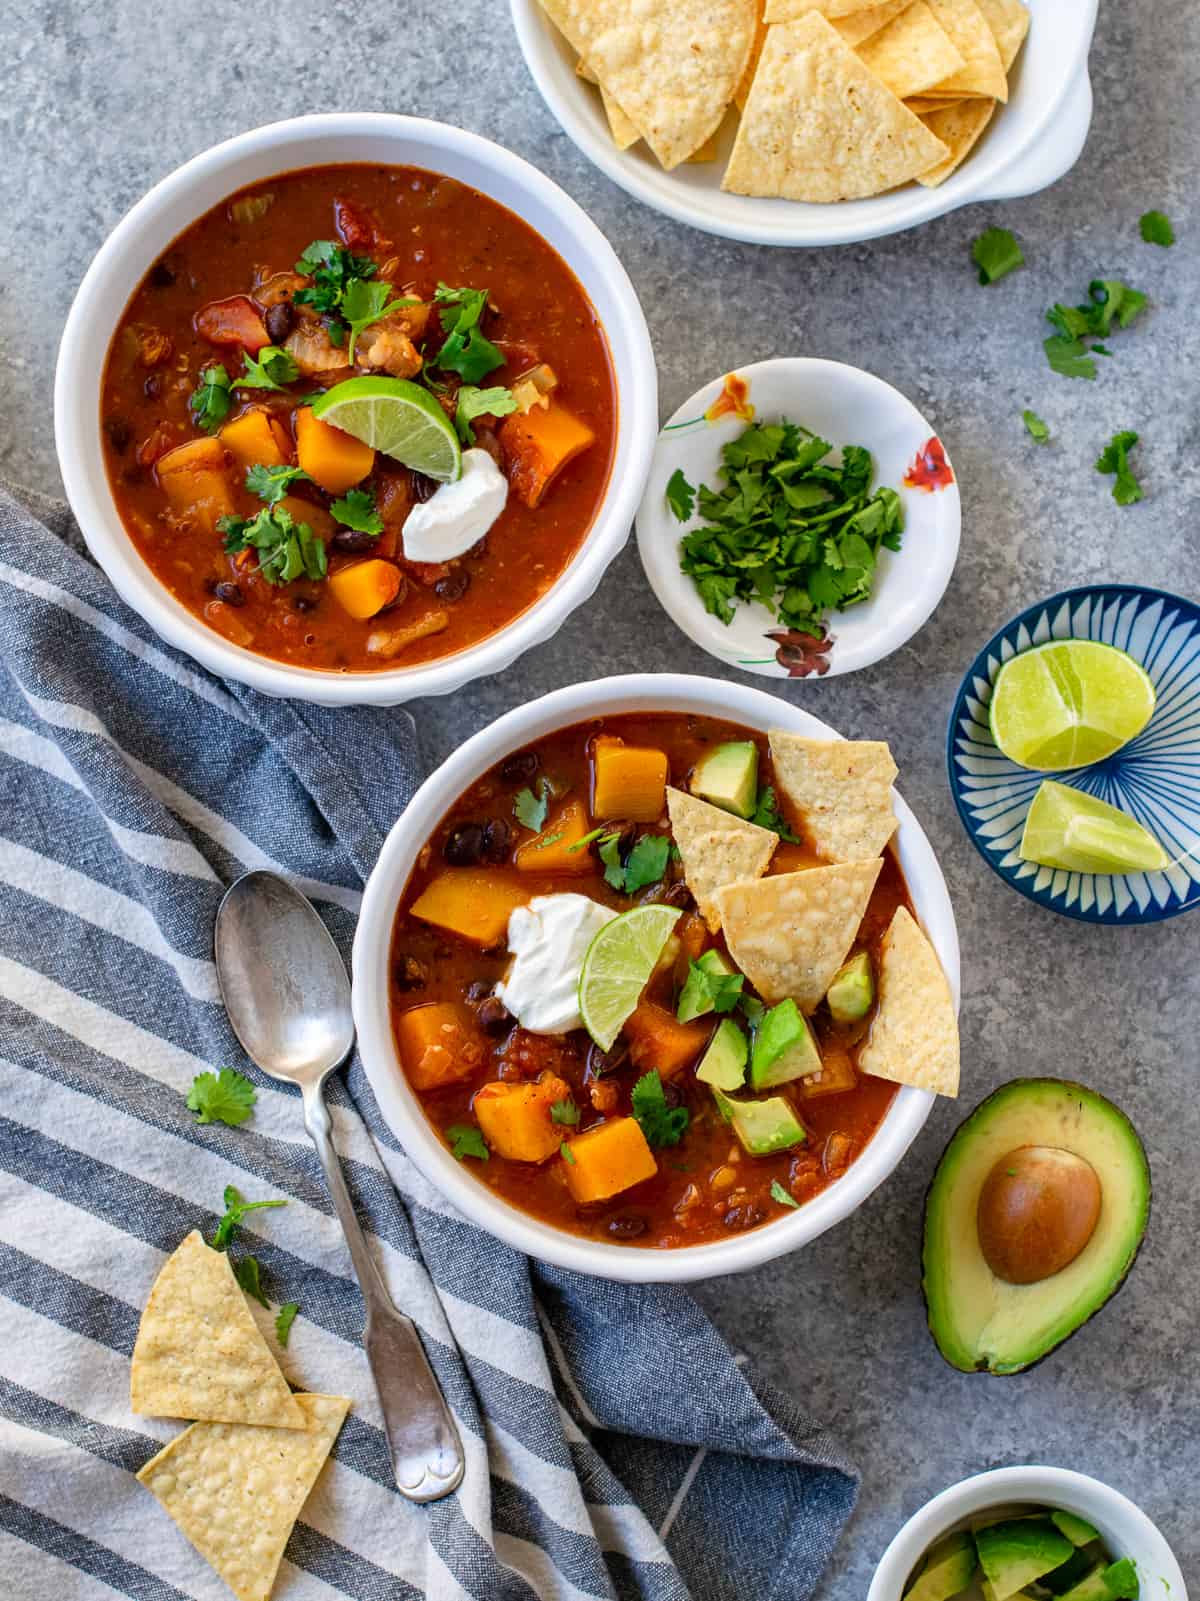 Vegan Butternut Squash and Black Bean Chili served with avocados, sour cream and lemon